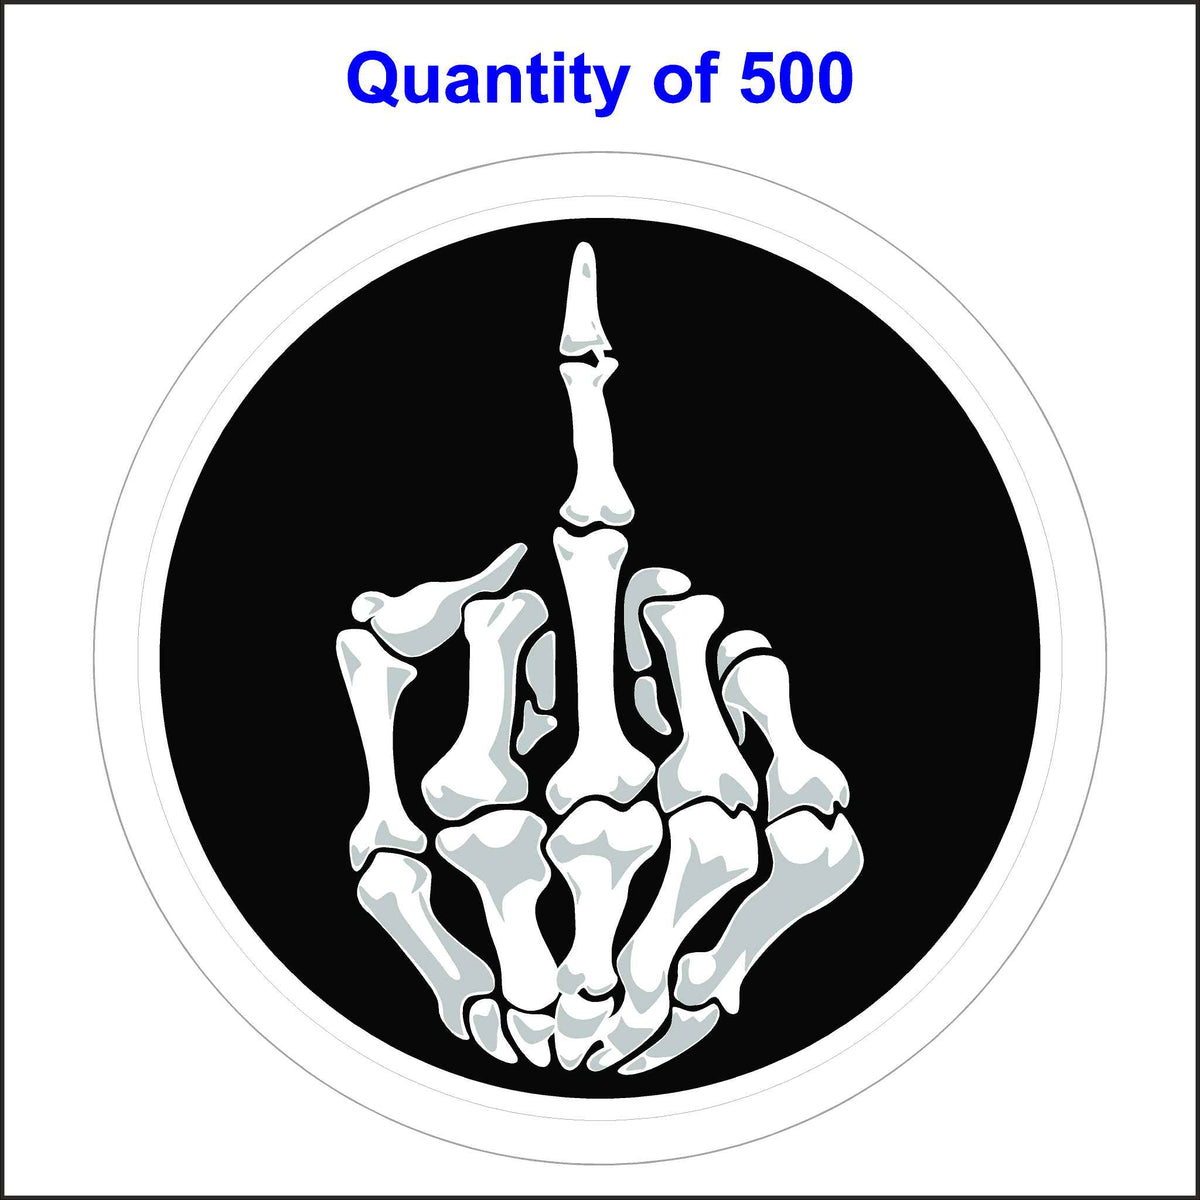 500 Quantity of This Skeleton Middle Finger Sticker.